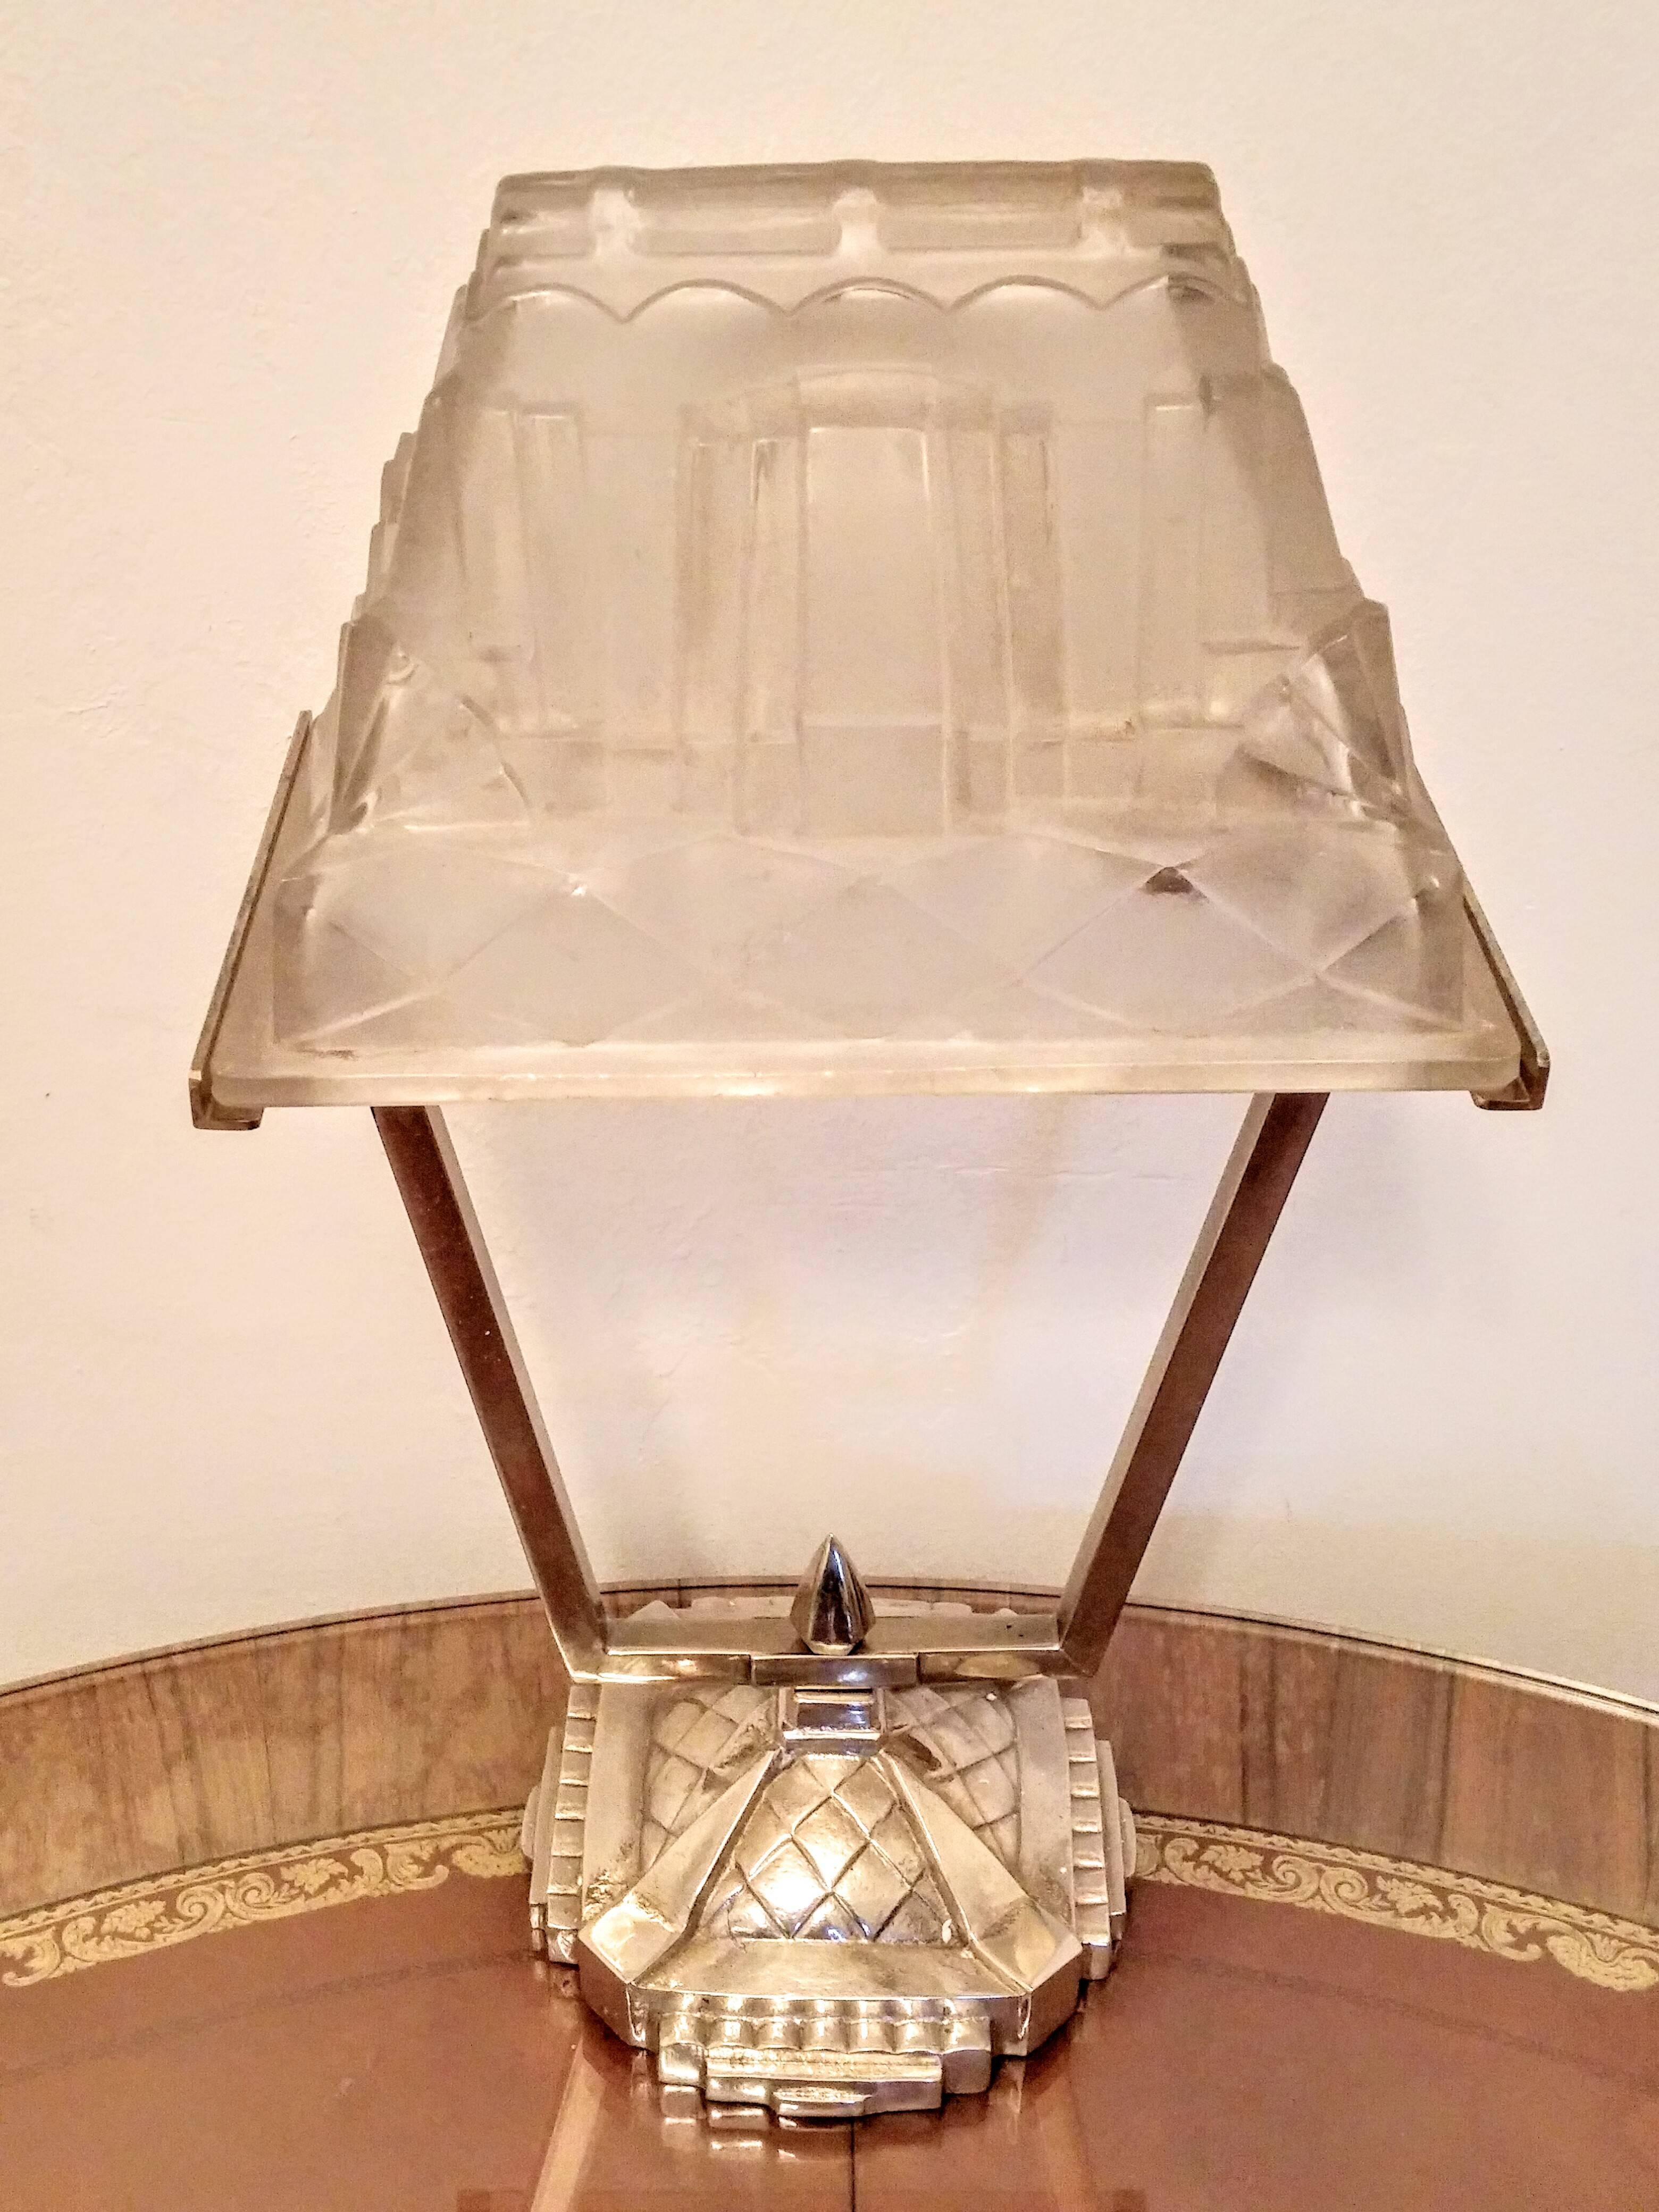 
A gorgeous French Art Deco table lamp by the French artist 